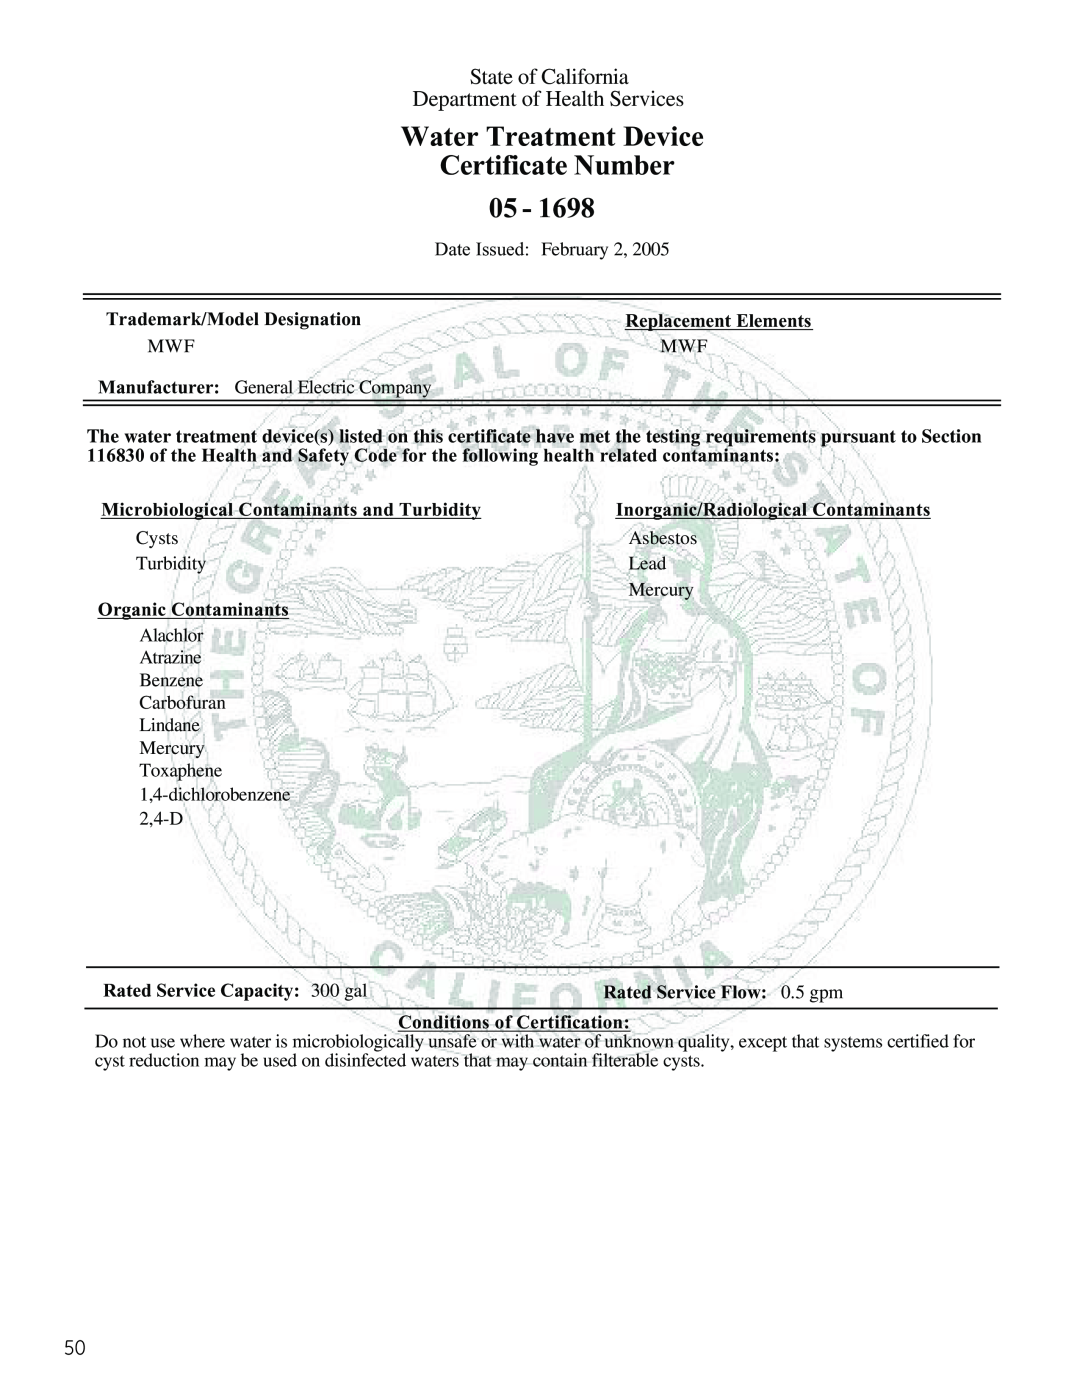 GE PFSS6SMXSS Certificate Number, Water Treatment Device, State of California, Department of Health Services 